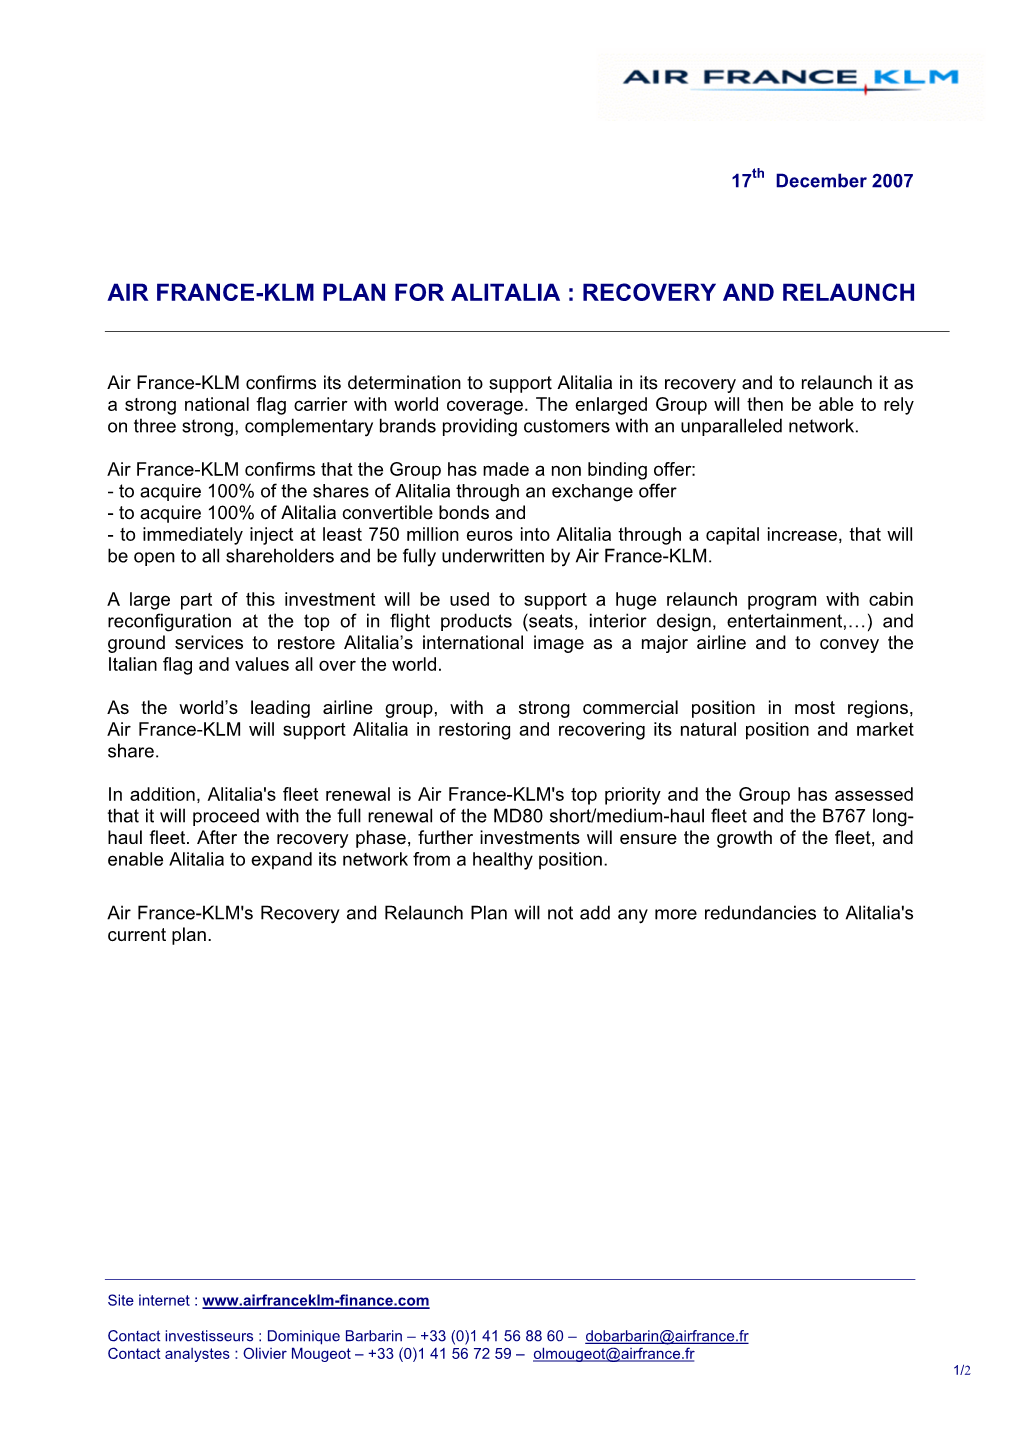 Air France-Klm Plan for Alitalia : Recovery and Relaunch